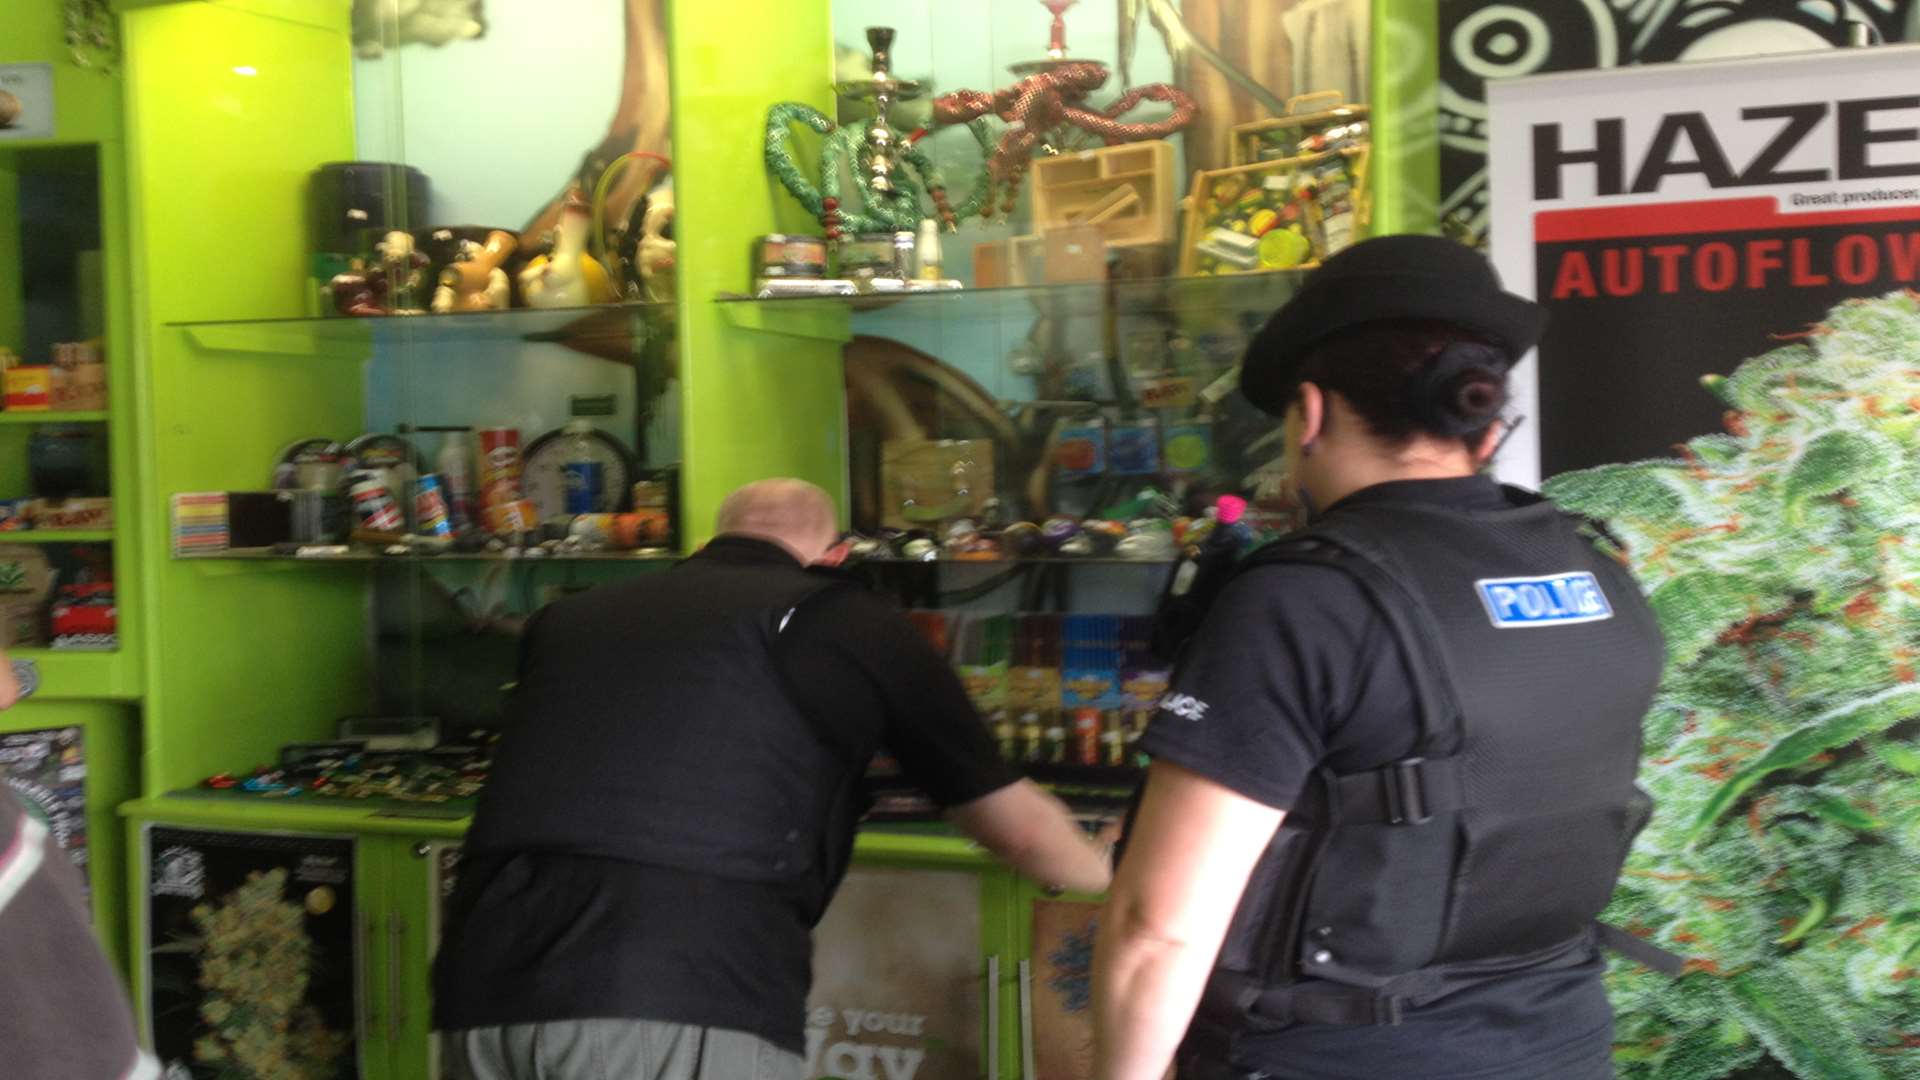 Officers inspect stock at a Maidstone store